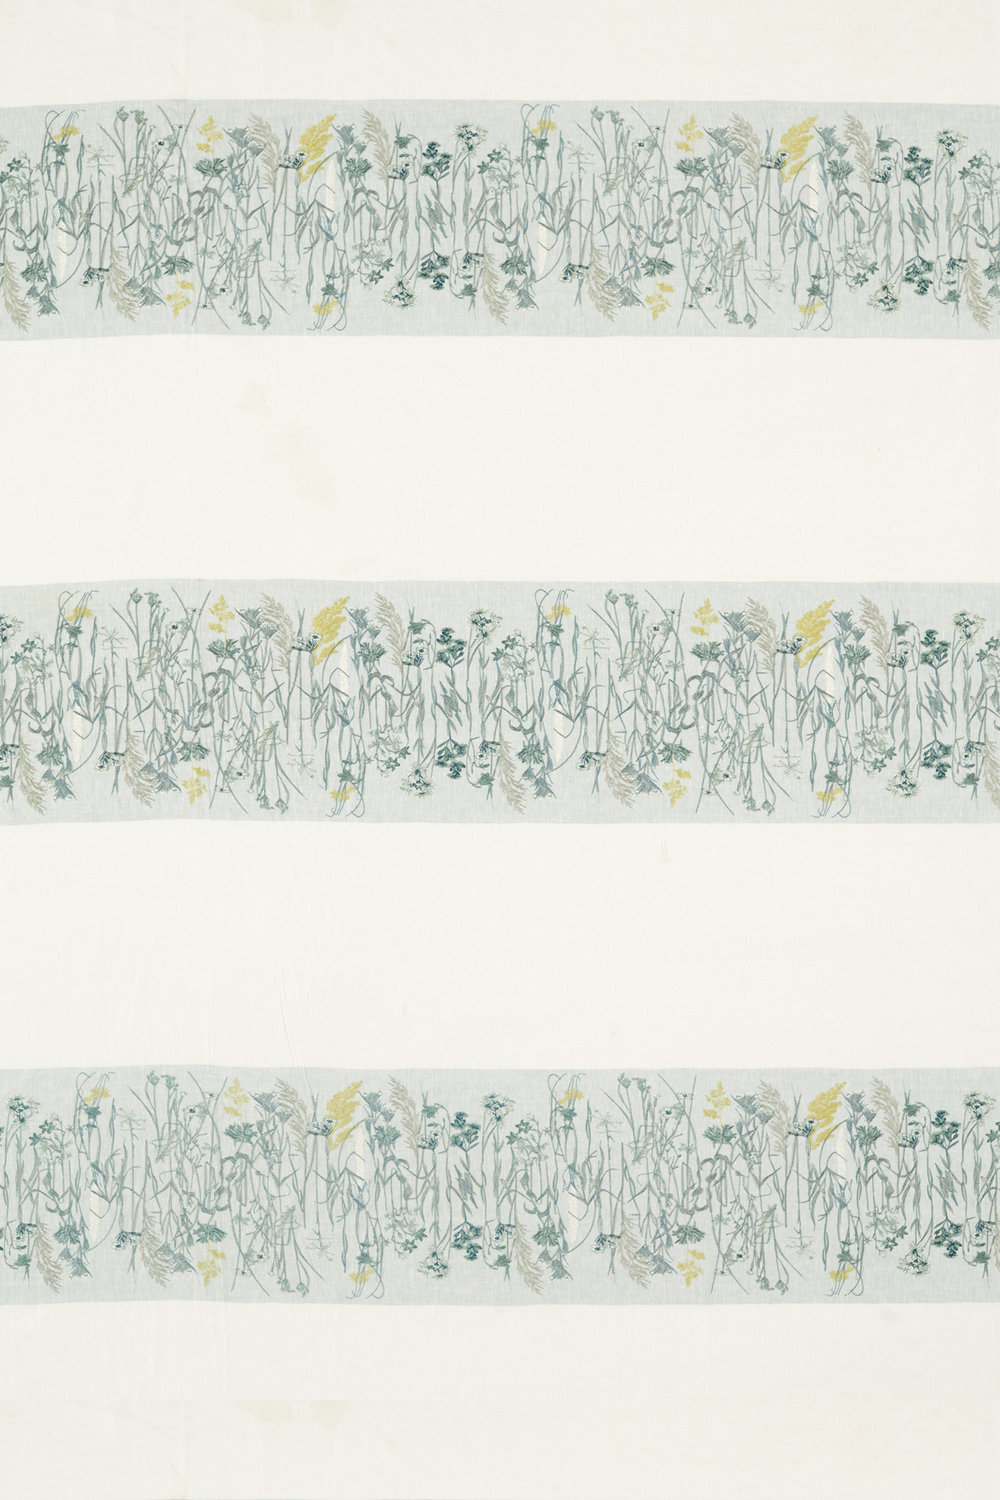 Pressed Flowers Fabric - Mist and Shell - by Sanderson